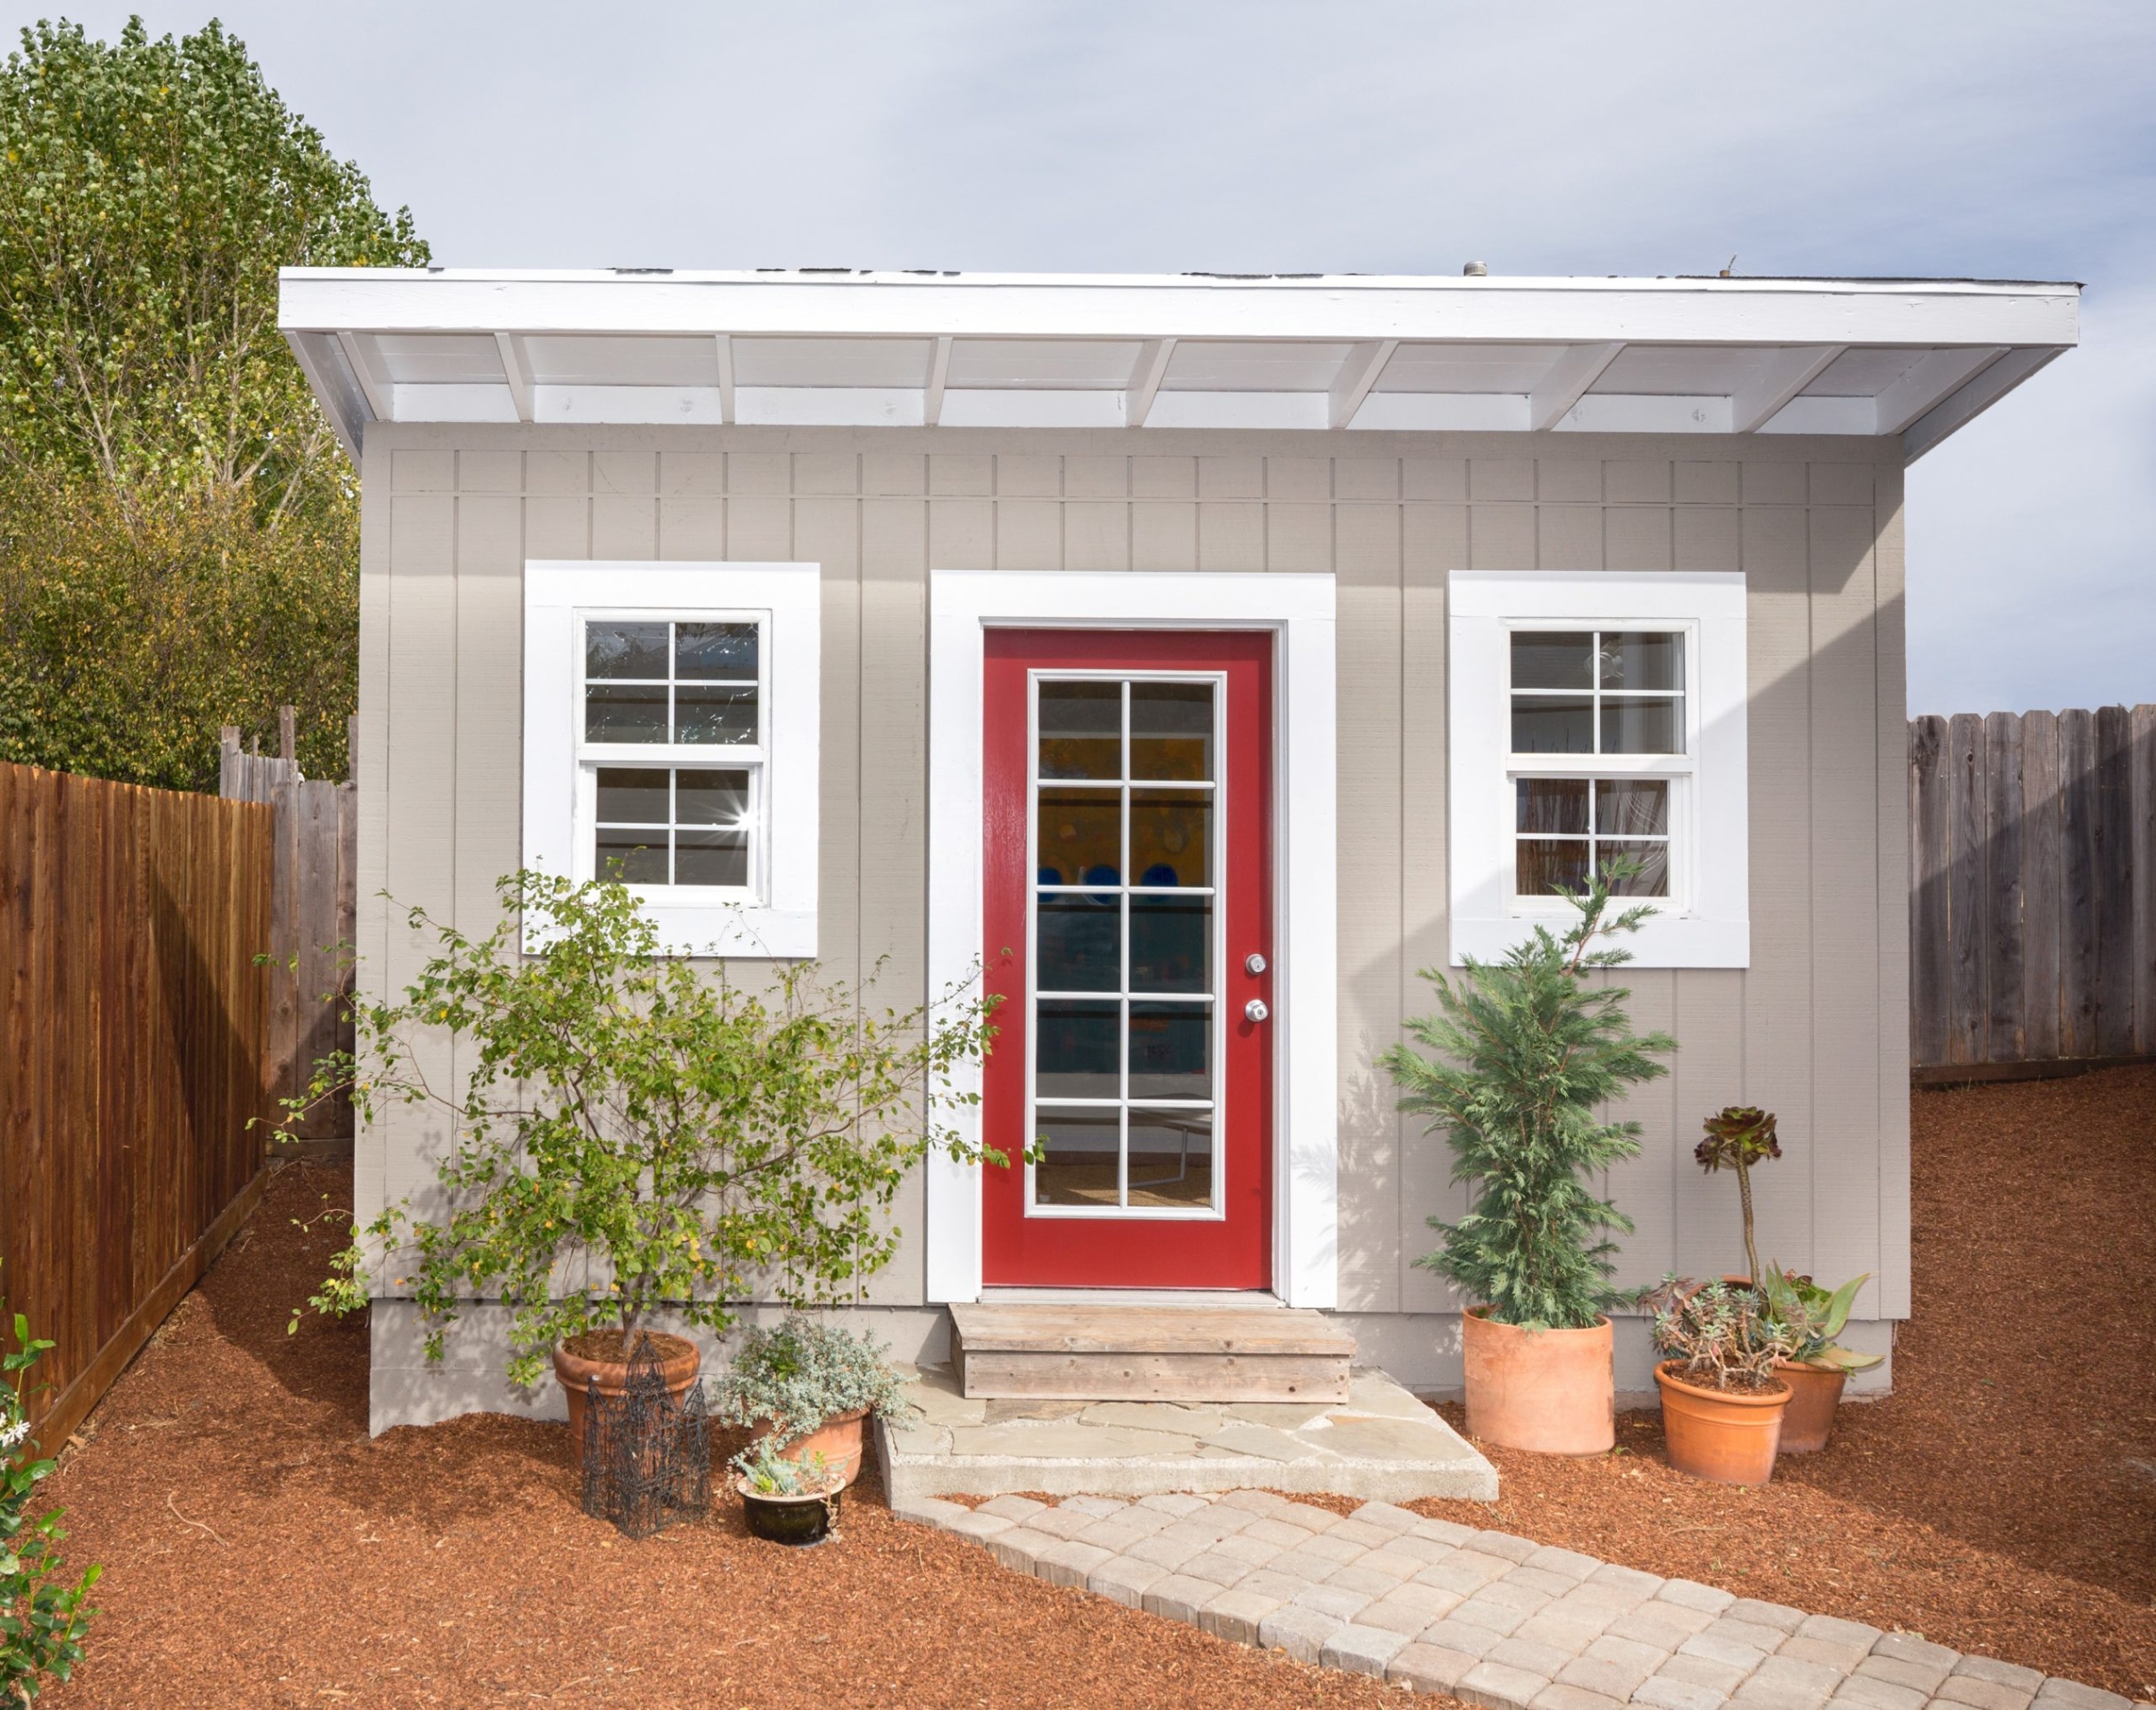 accessory dwelling units california Bulan 3 Building and Landlording with "Granny Flats" - Accessory Dwelling